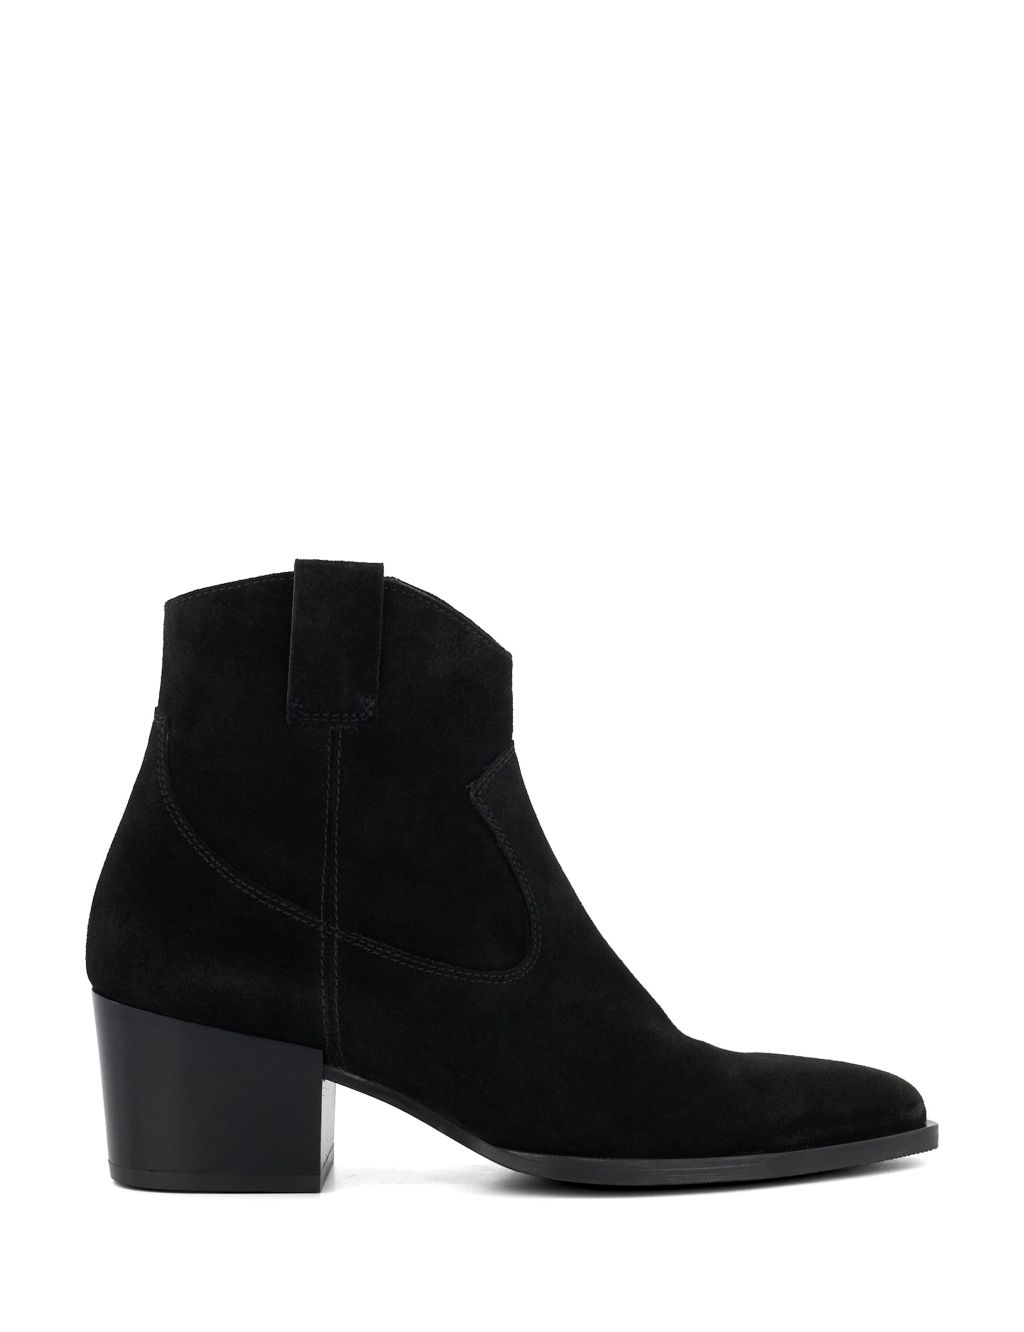 Suede Cow Boy Block Heel Ankle Boots image 1